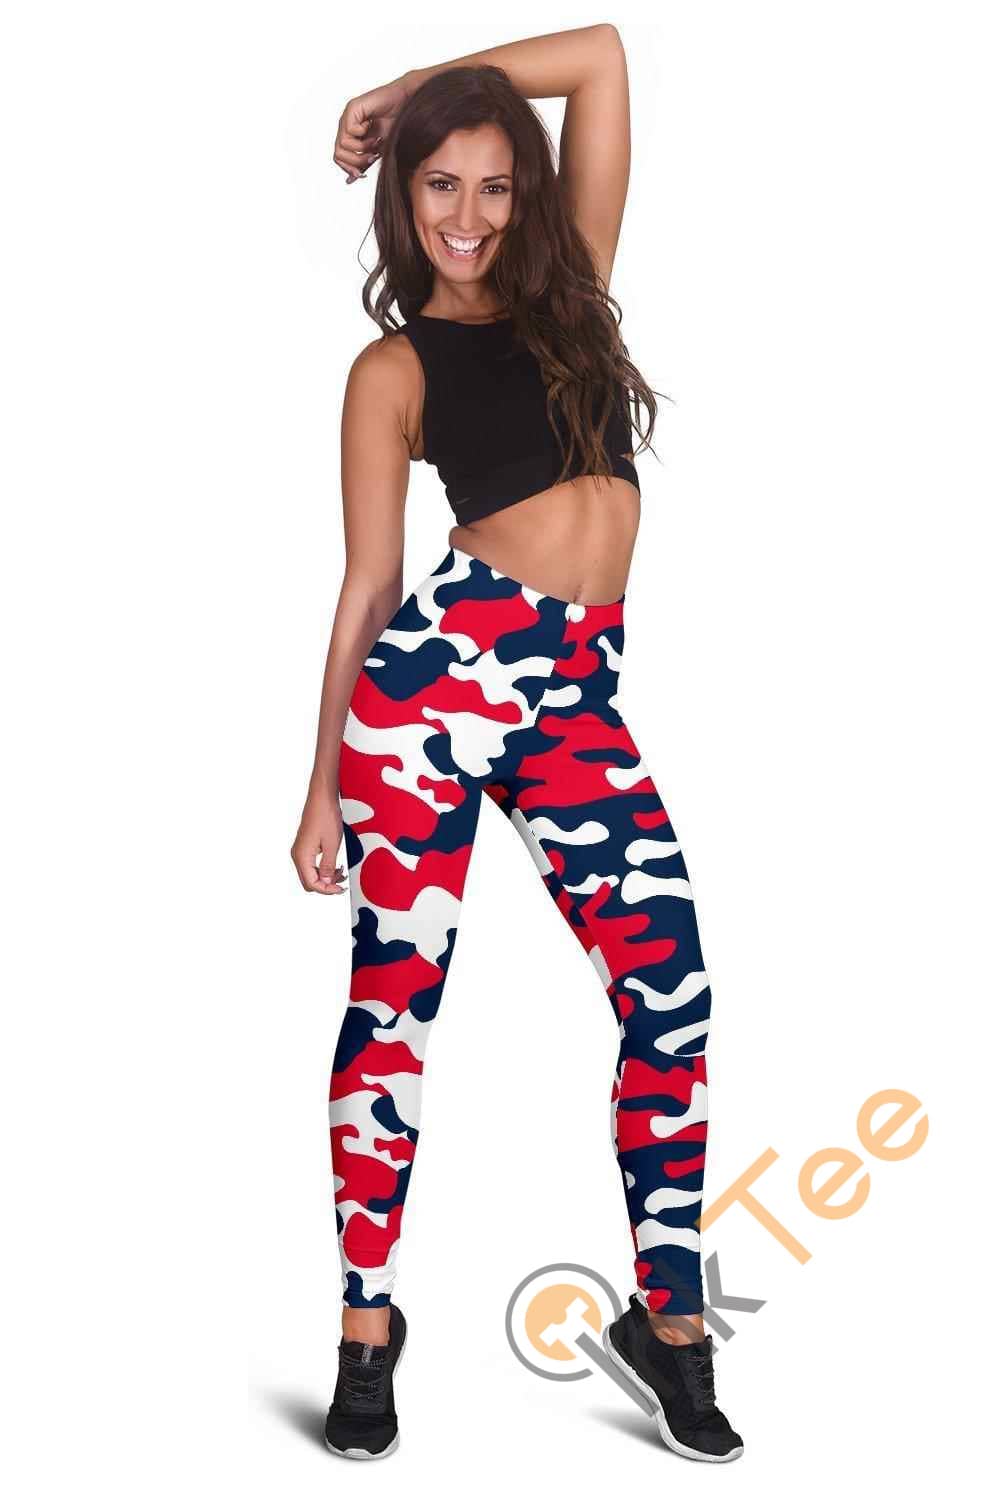 Inktee Store - New England Patriots Inspired Tru Camo 3D All Over Print For Yoga Fitness Fashion Women'S Leggings Image